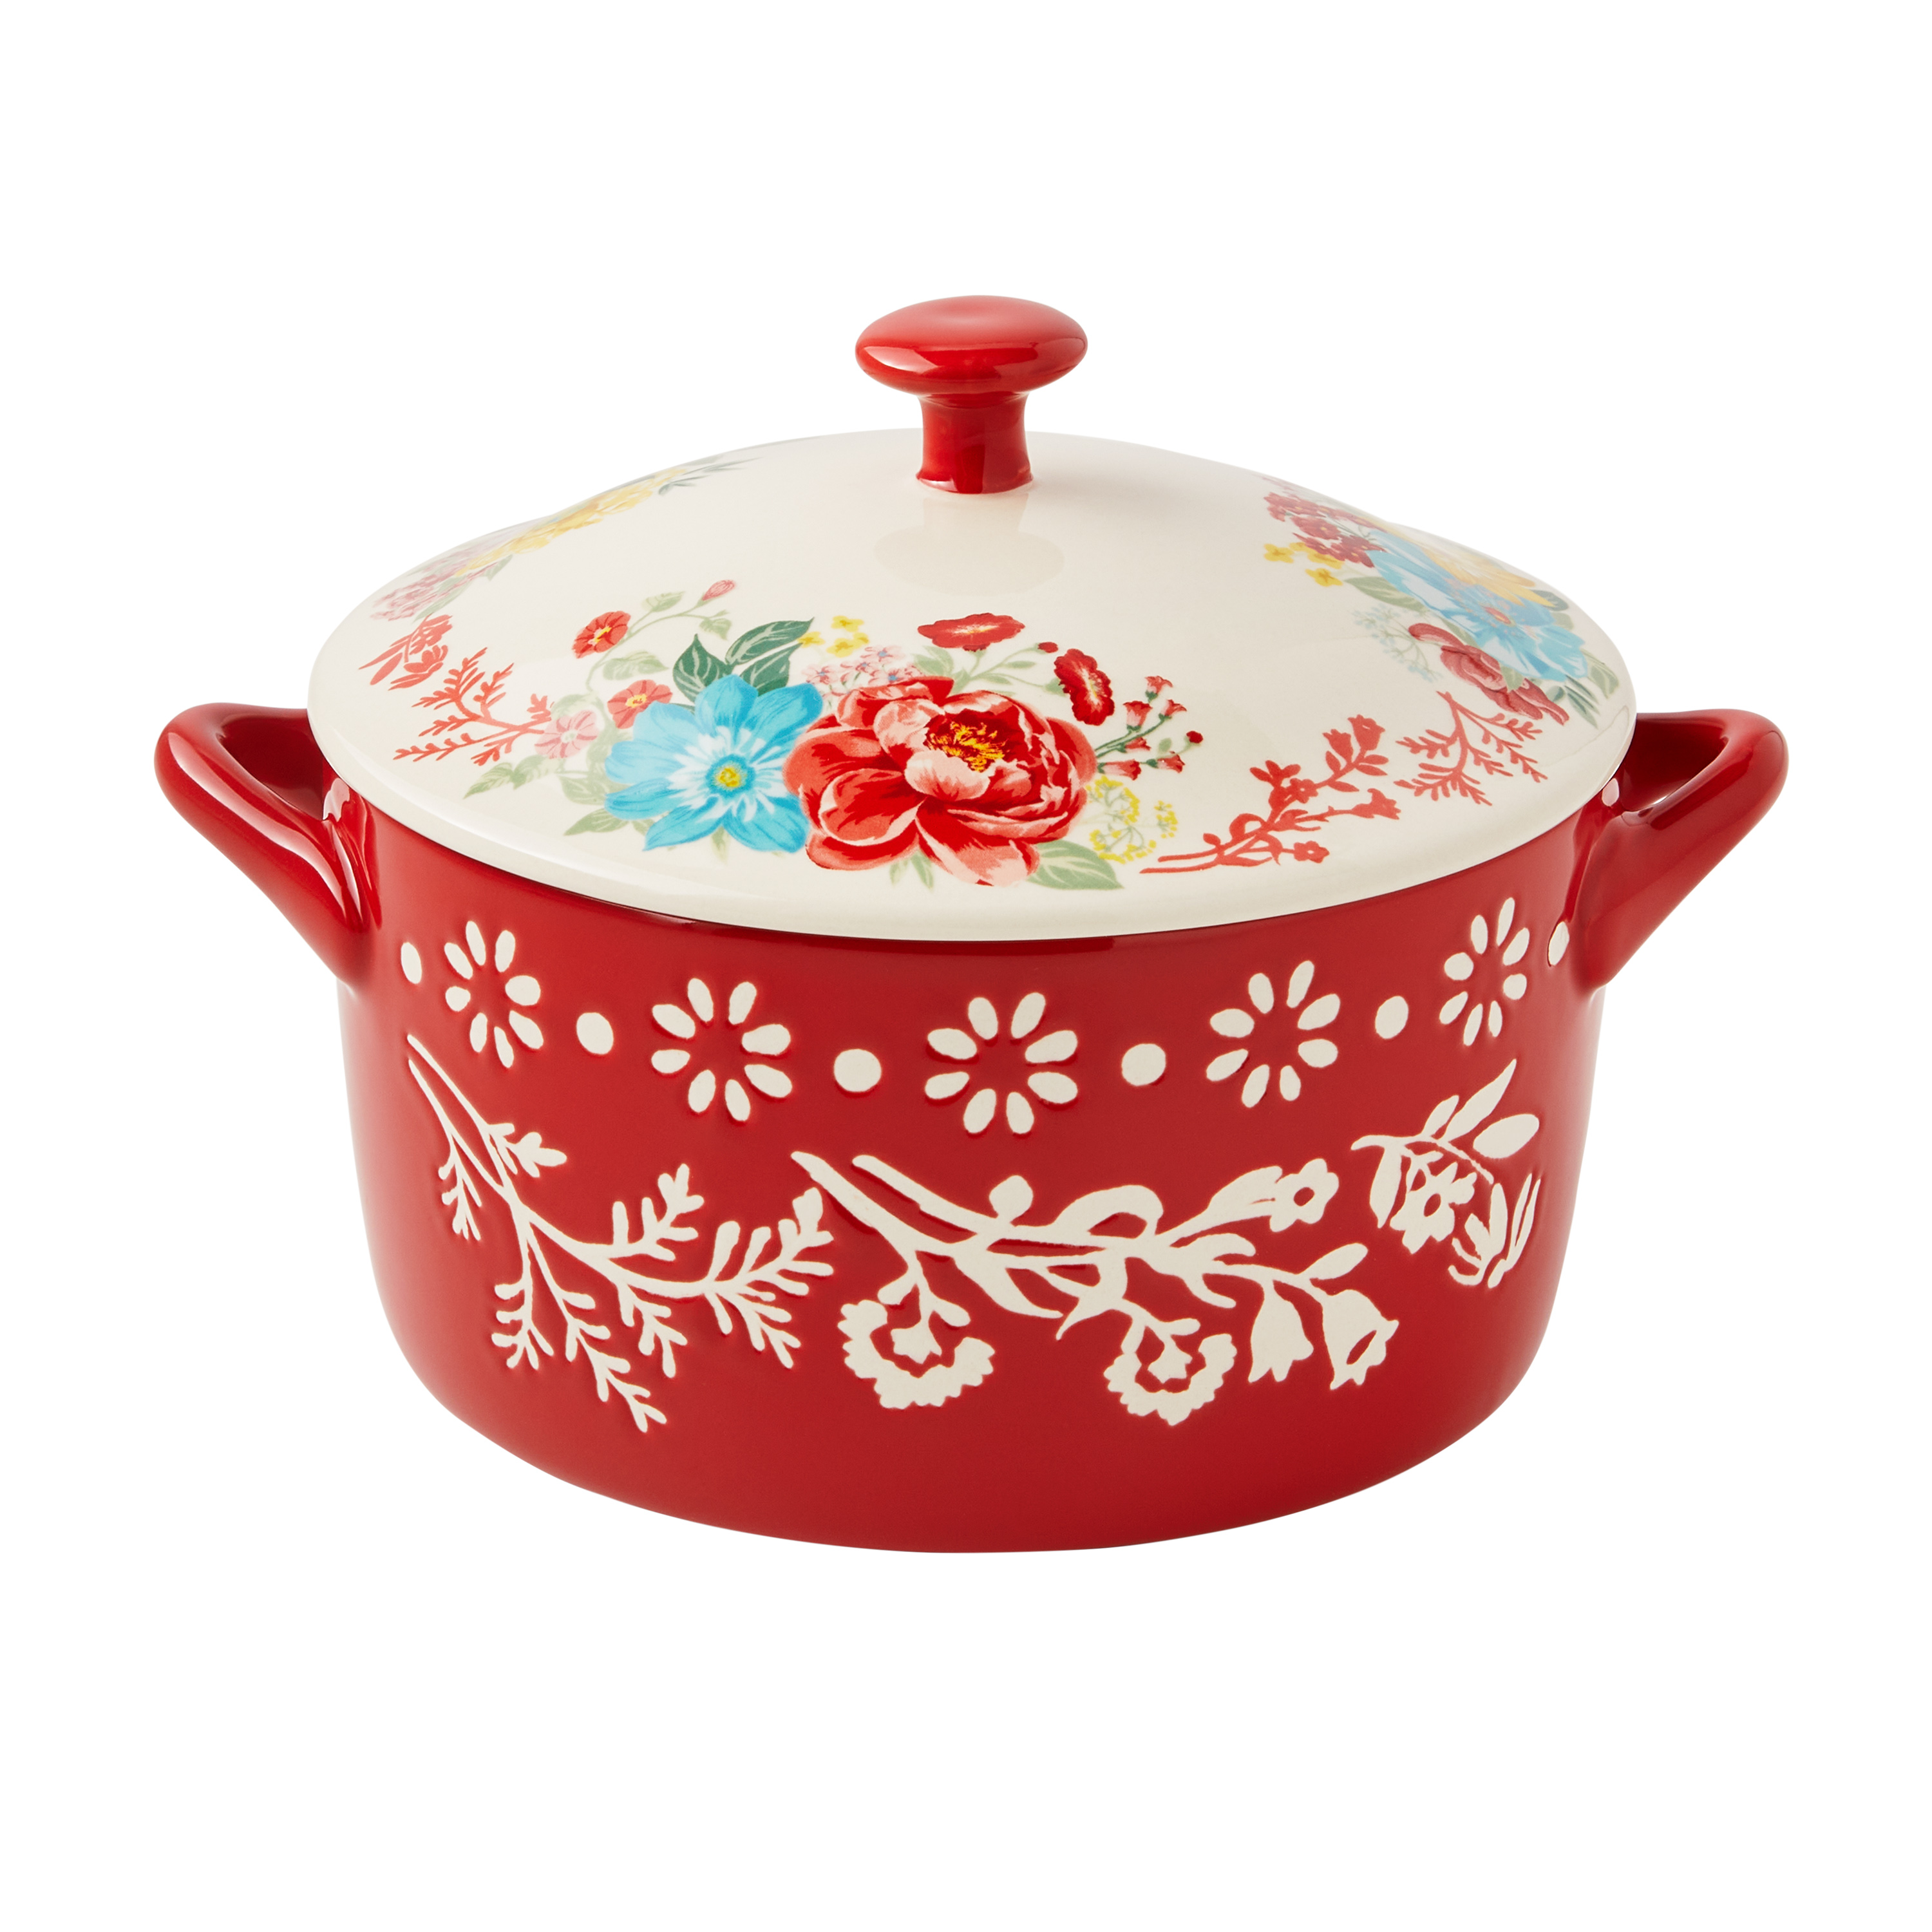 The Pioneer Woman Fancy Flourish Round Ceramic Casserole Dish with Lid - image 1 of 6